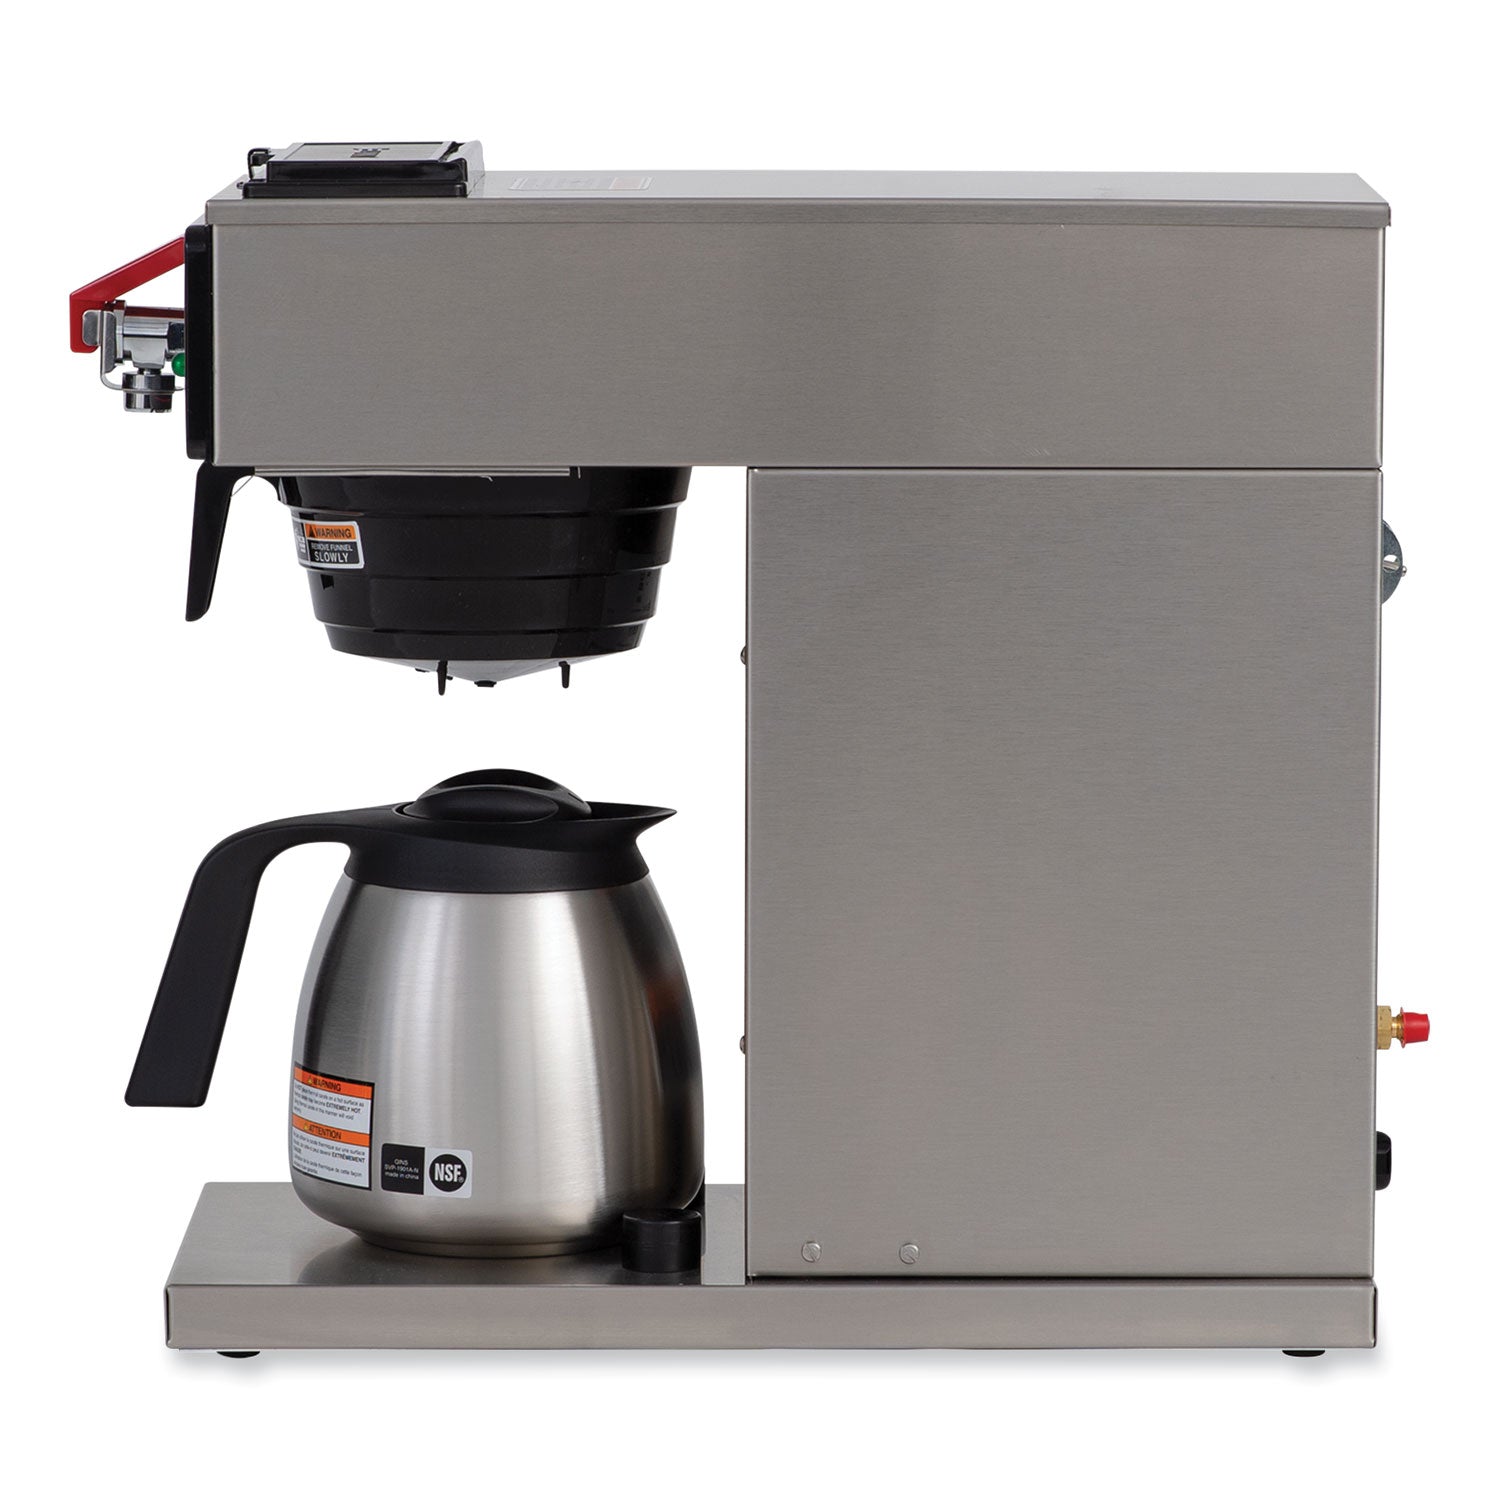 cwtf15-tc-12-cup-automatic-thermal-coffee-brewer-gray-stainless-steel-ships-in-7-10-business-days_bun129500360 - 3